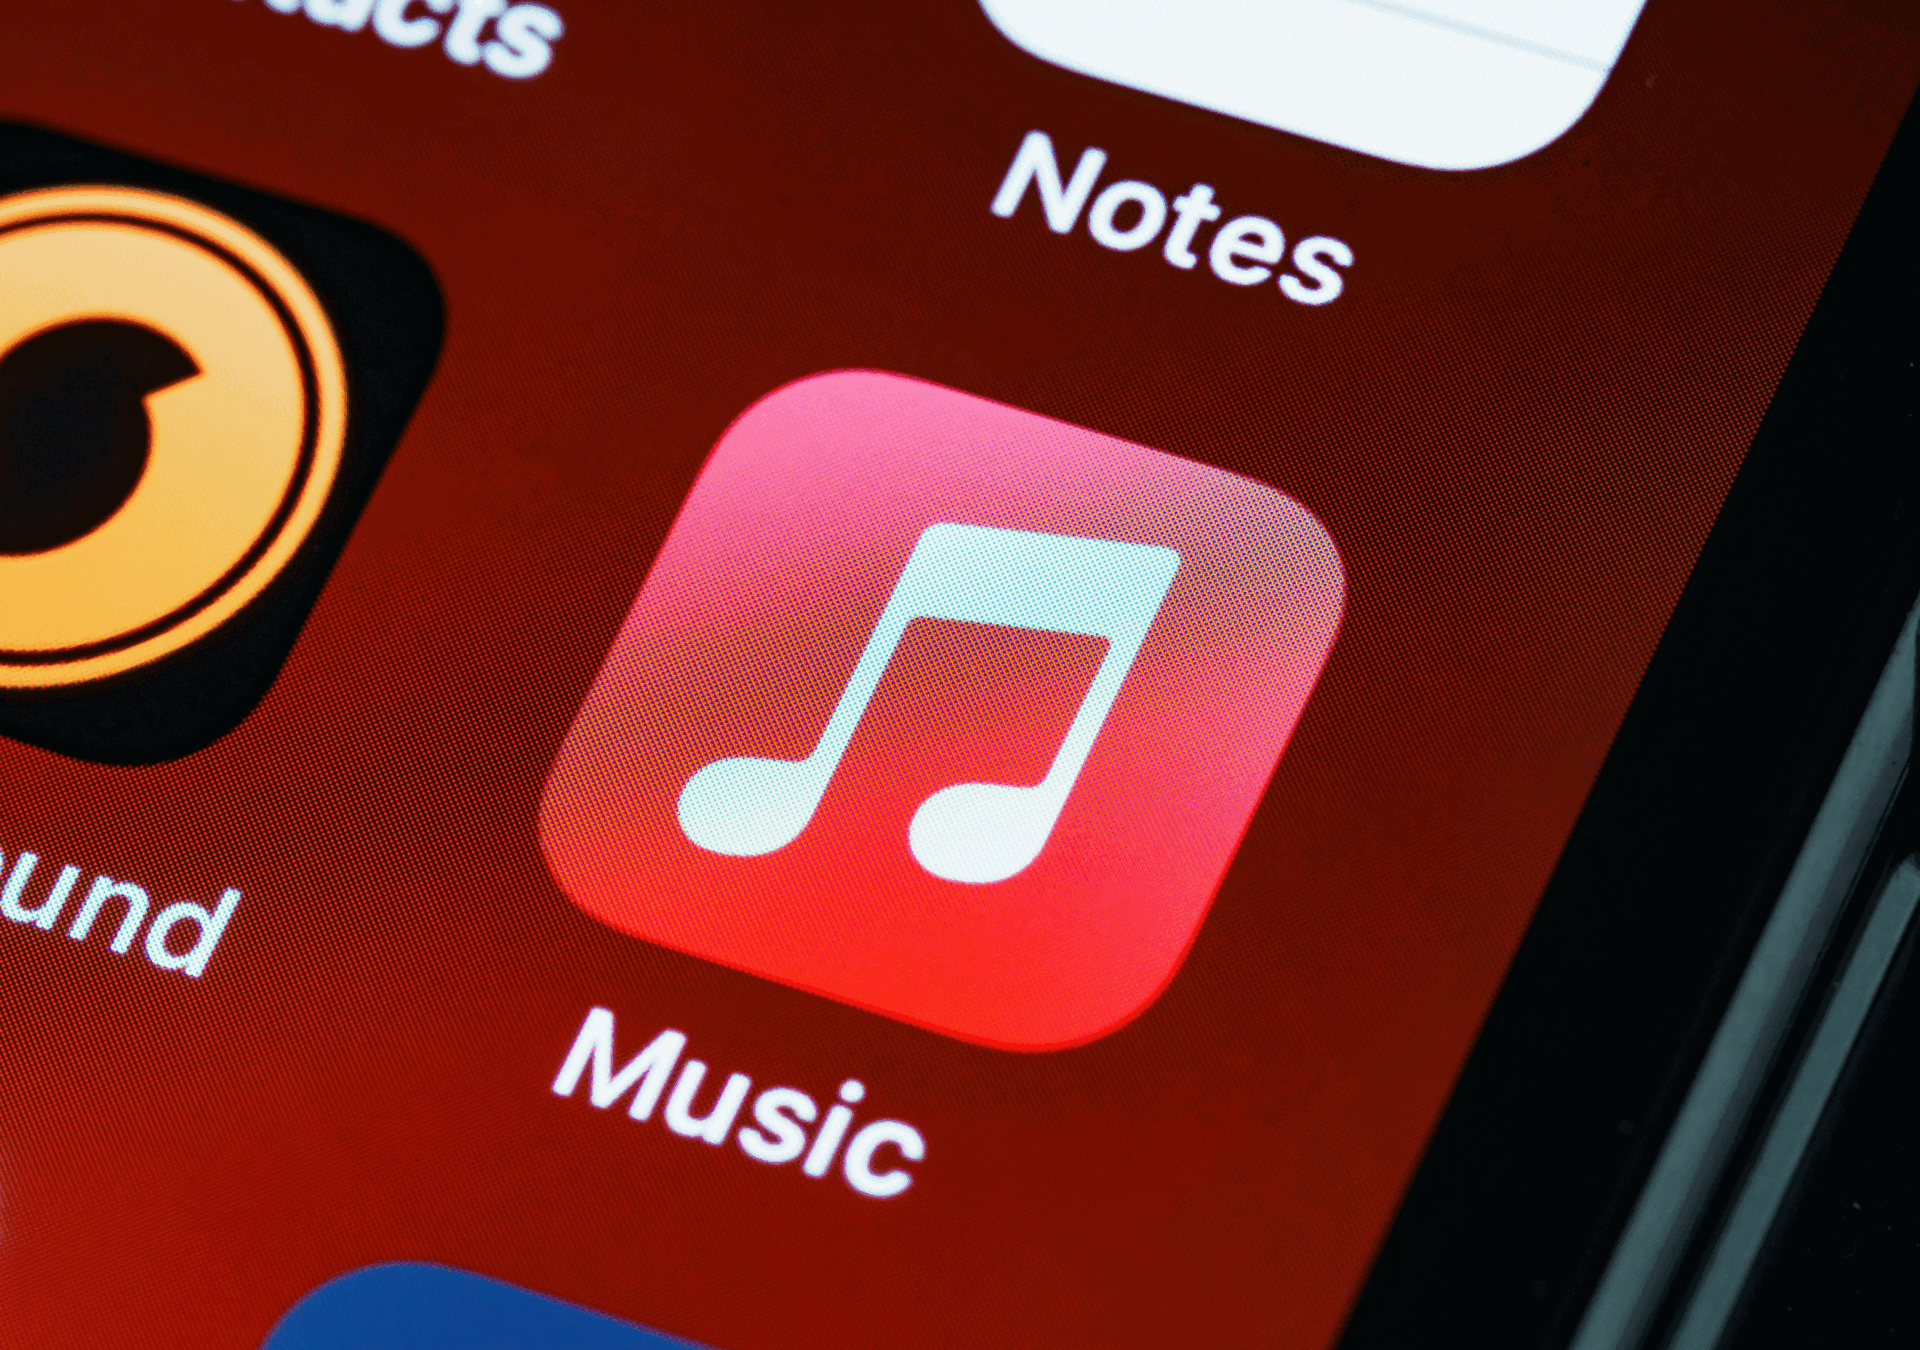 Apple slams Spotify following €1.8bn fine over App Store ‘dominance’ in music streaming